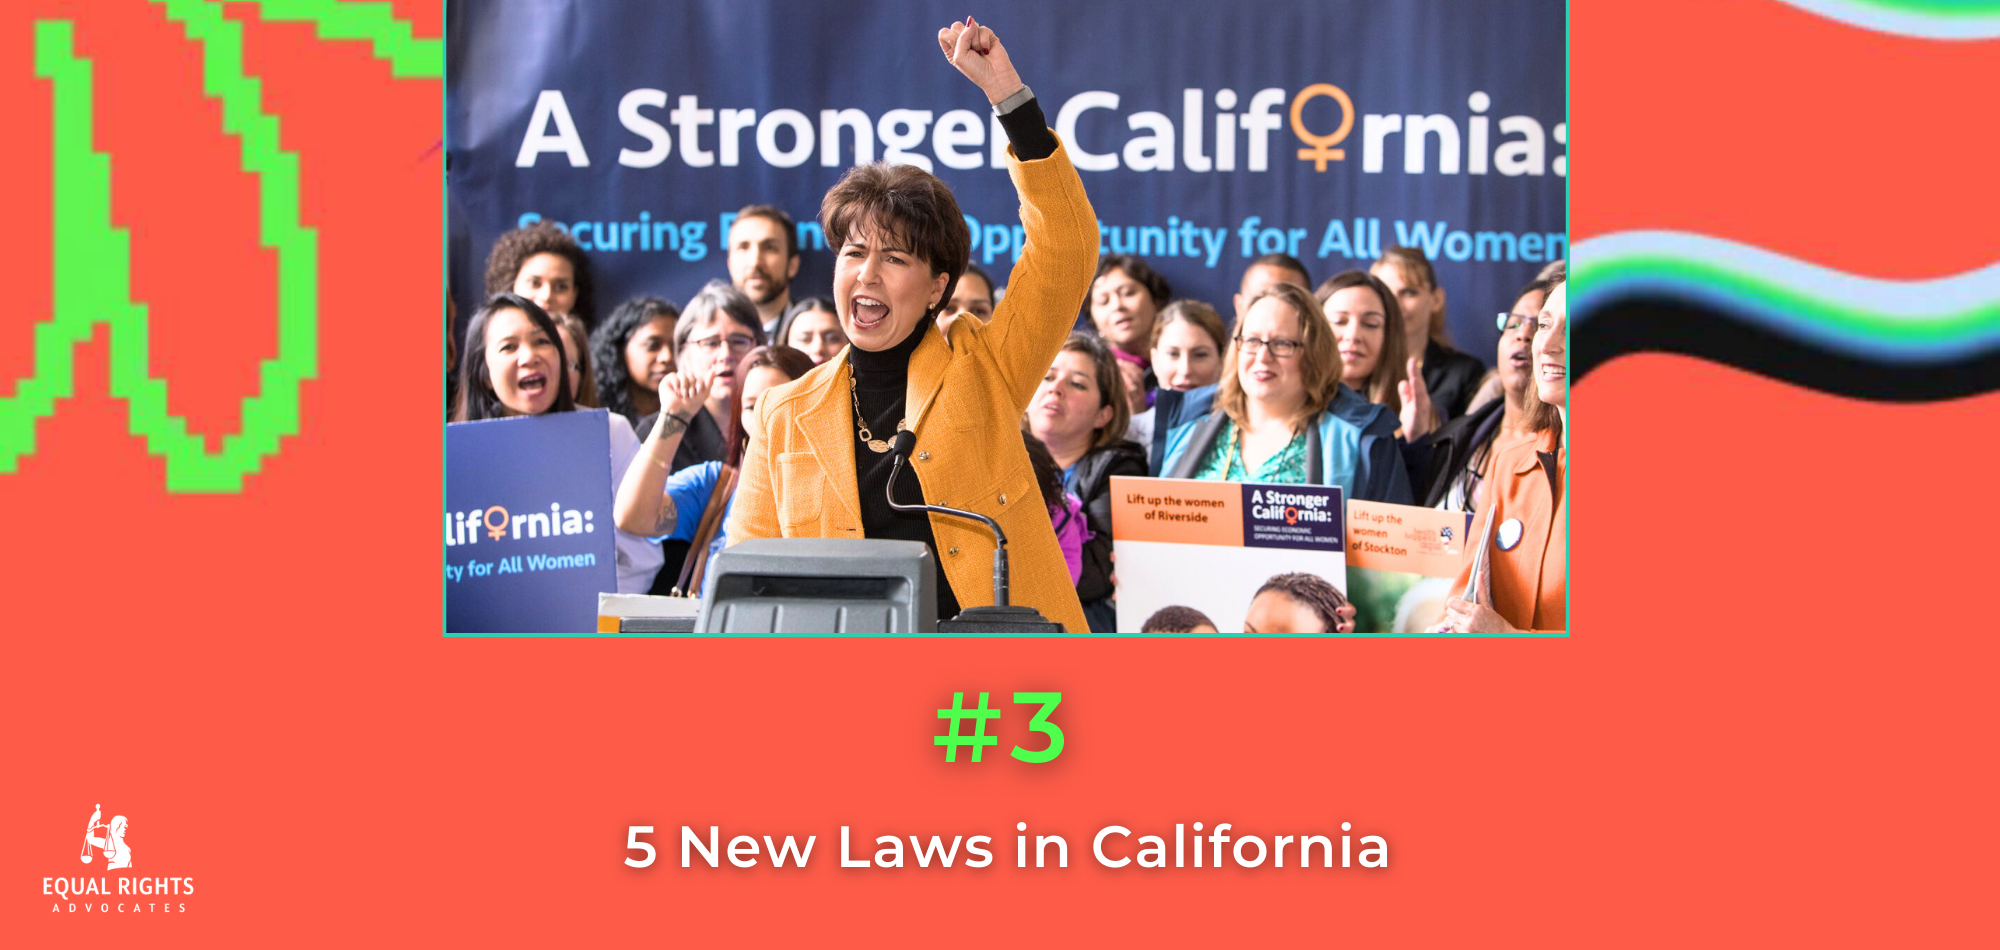 A dark coral orange image with green and black swirls and flower design. At the top, photo of a Stronger California rally, with workers standing behind a lawmaker standing at a podium, whose fist is raised in the air. Underneath, text: #3, 5 New Laws in California